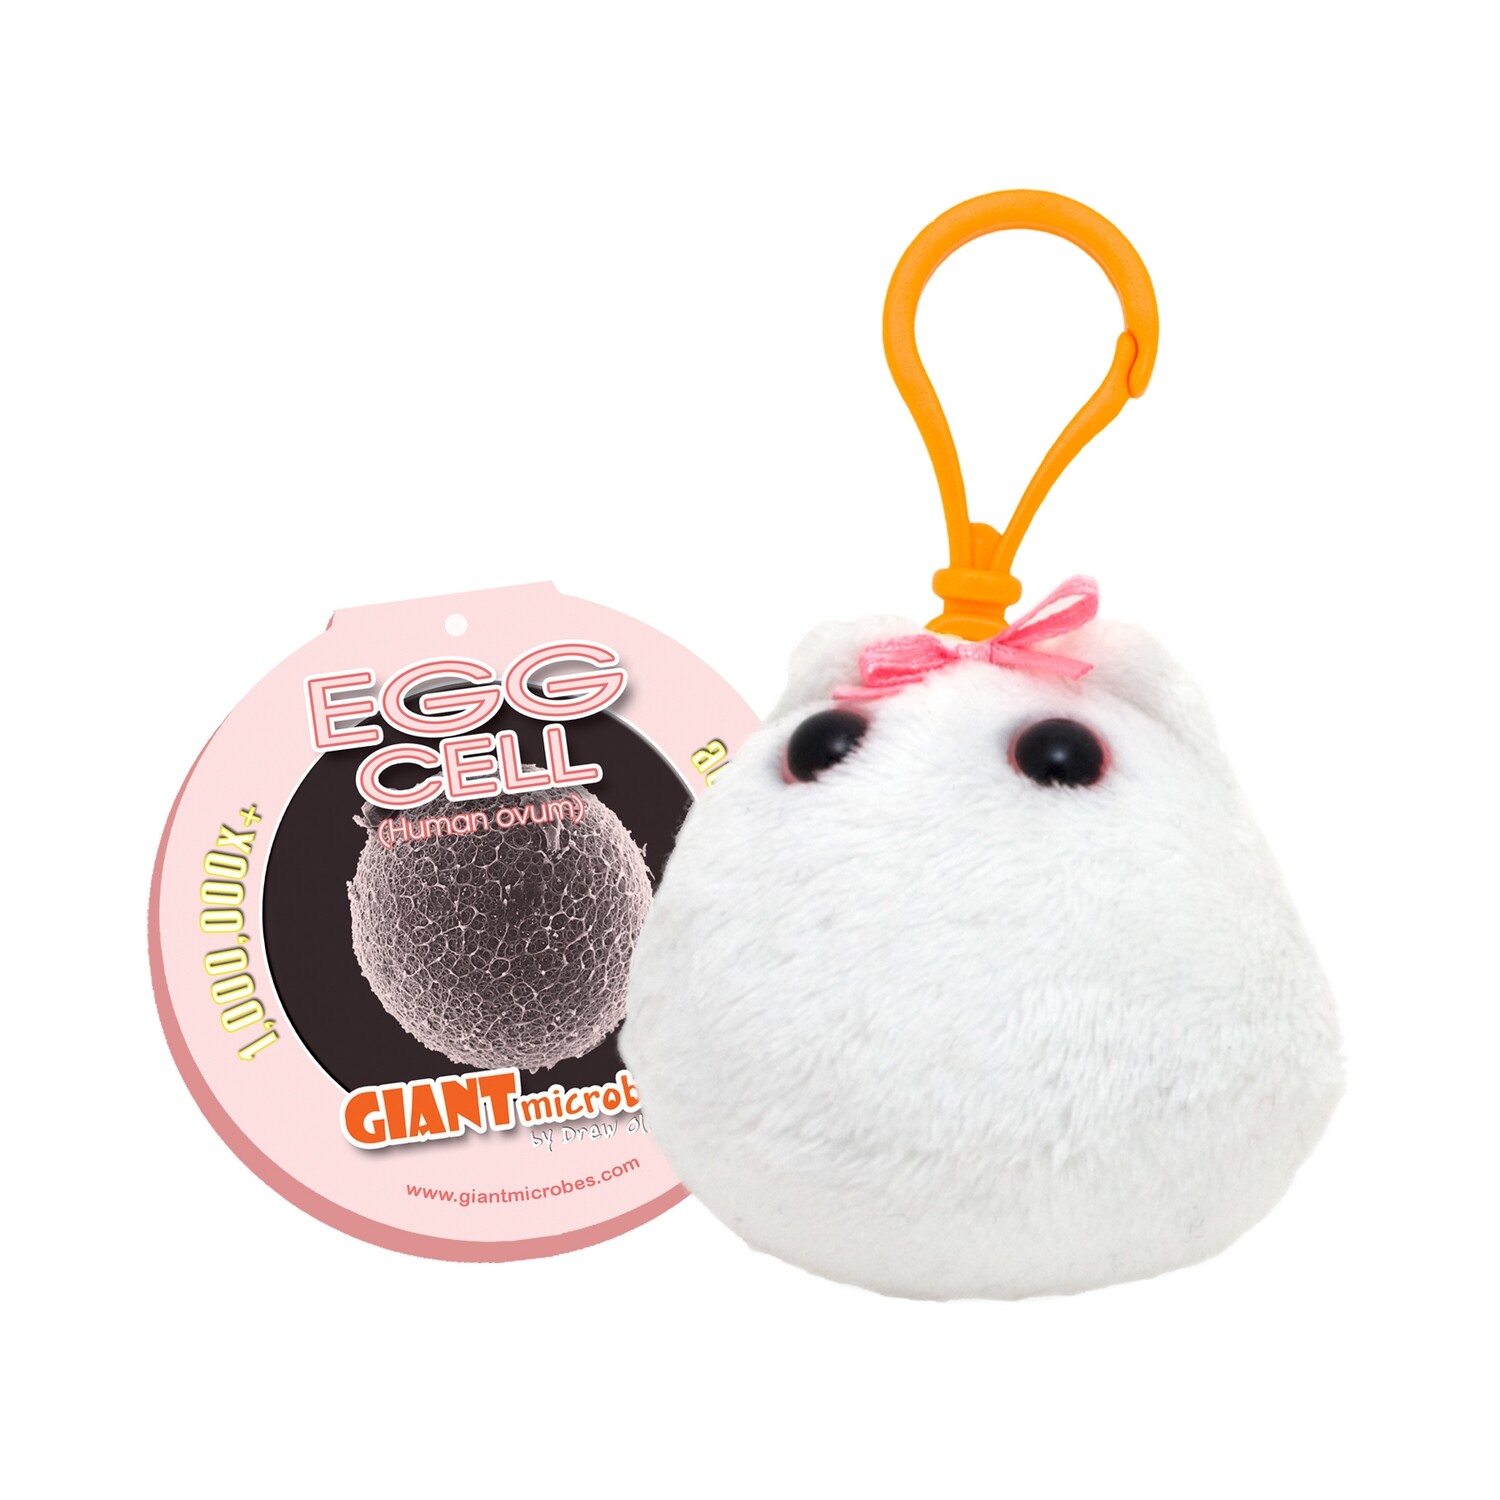 Giant Microbe KeyChain Egg Cell